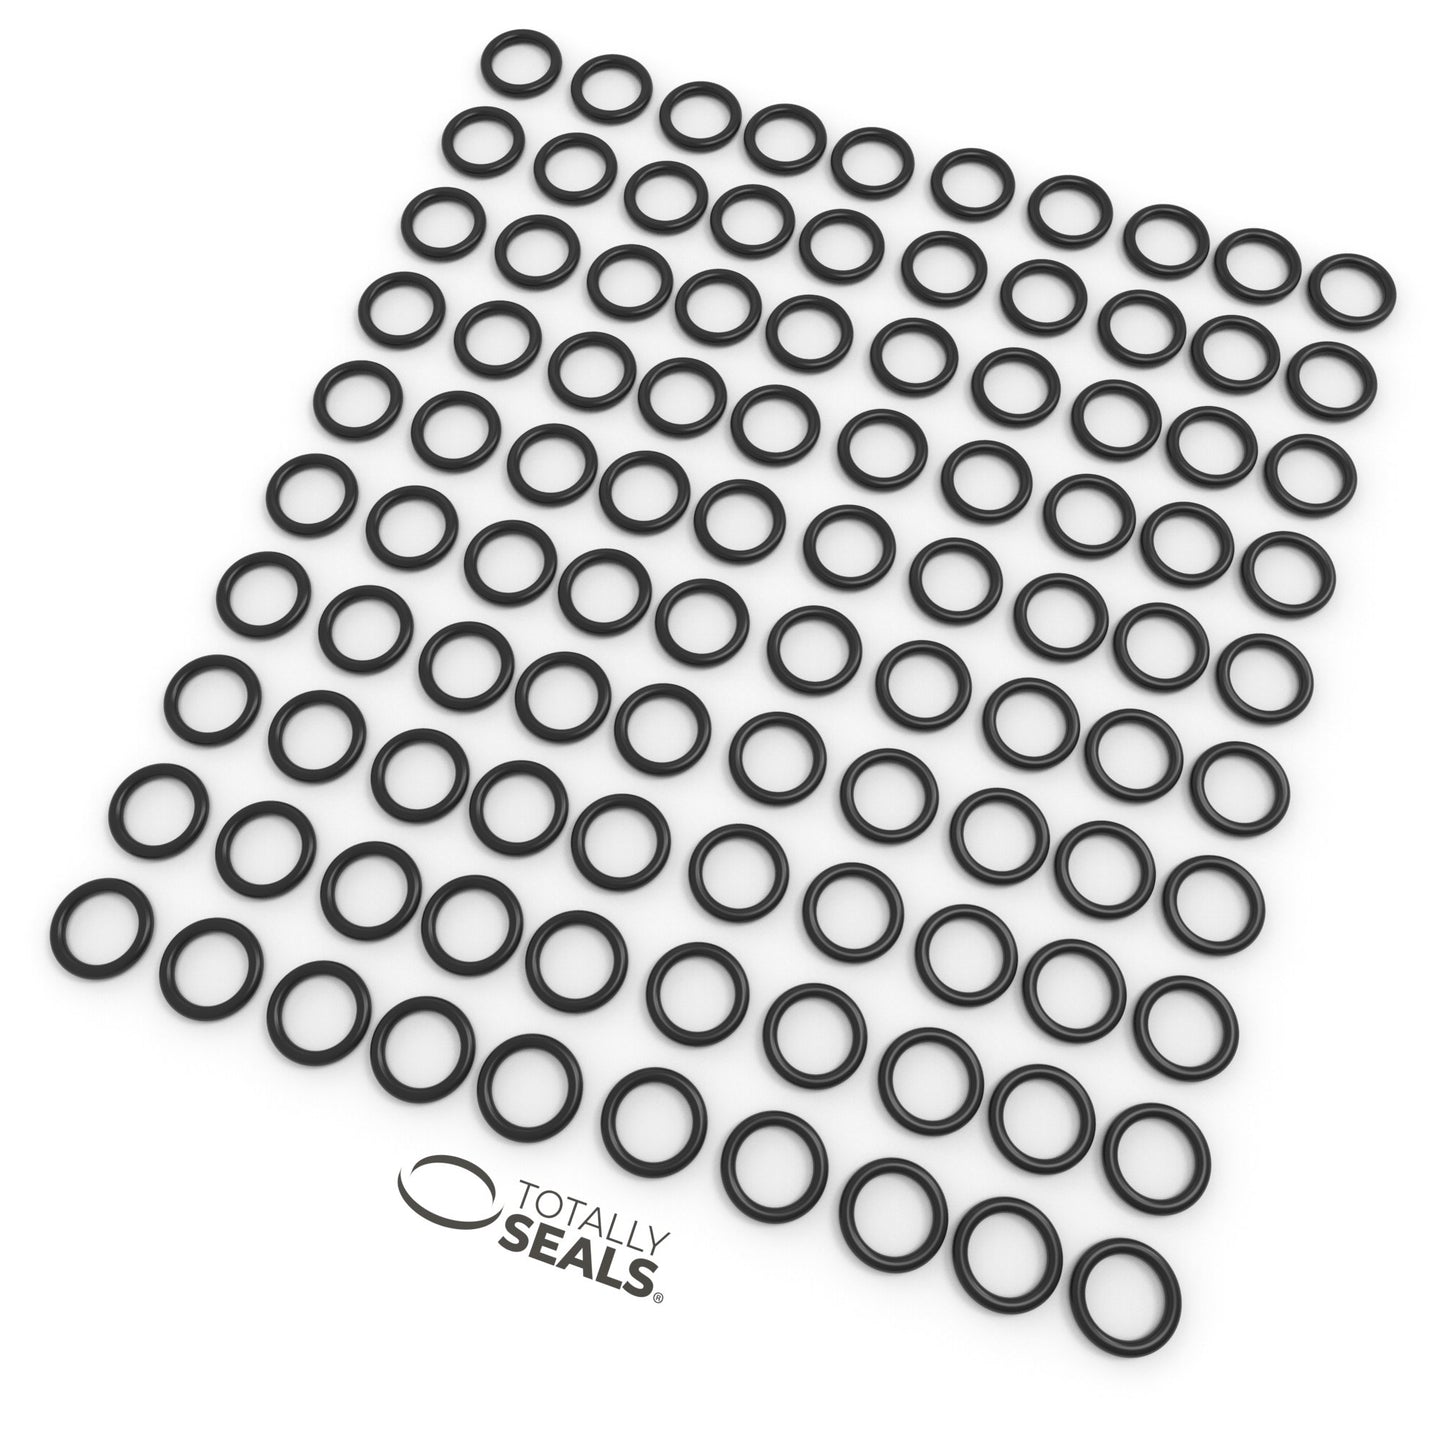 40mm x 2.5mm (45mm OD) Nitrile O-Rings - Totally Seals®